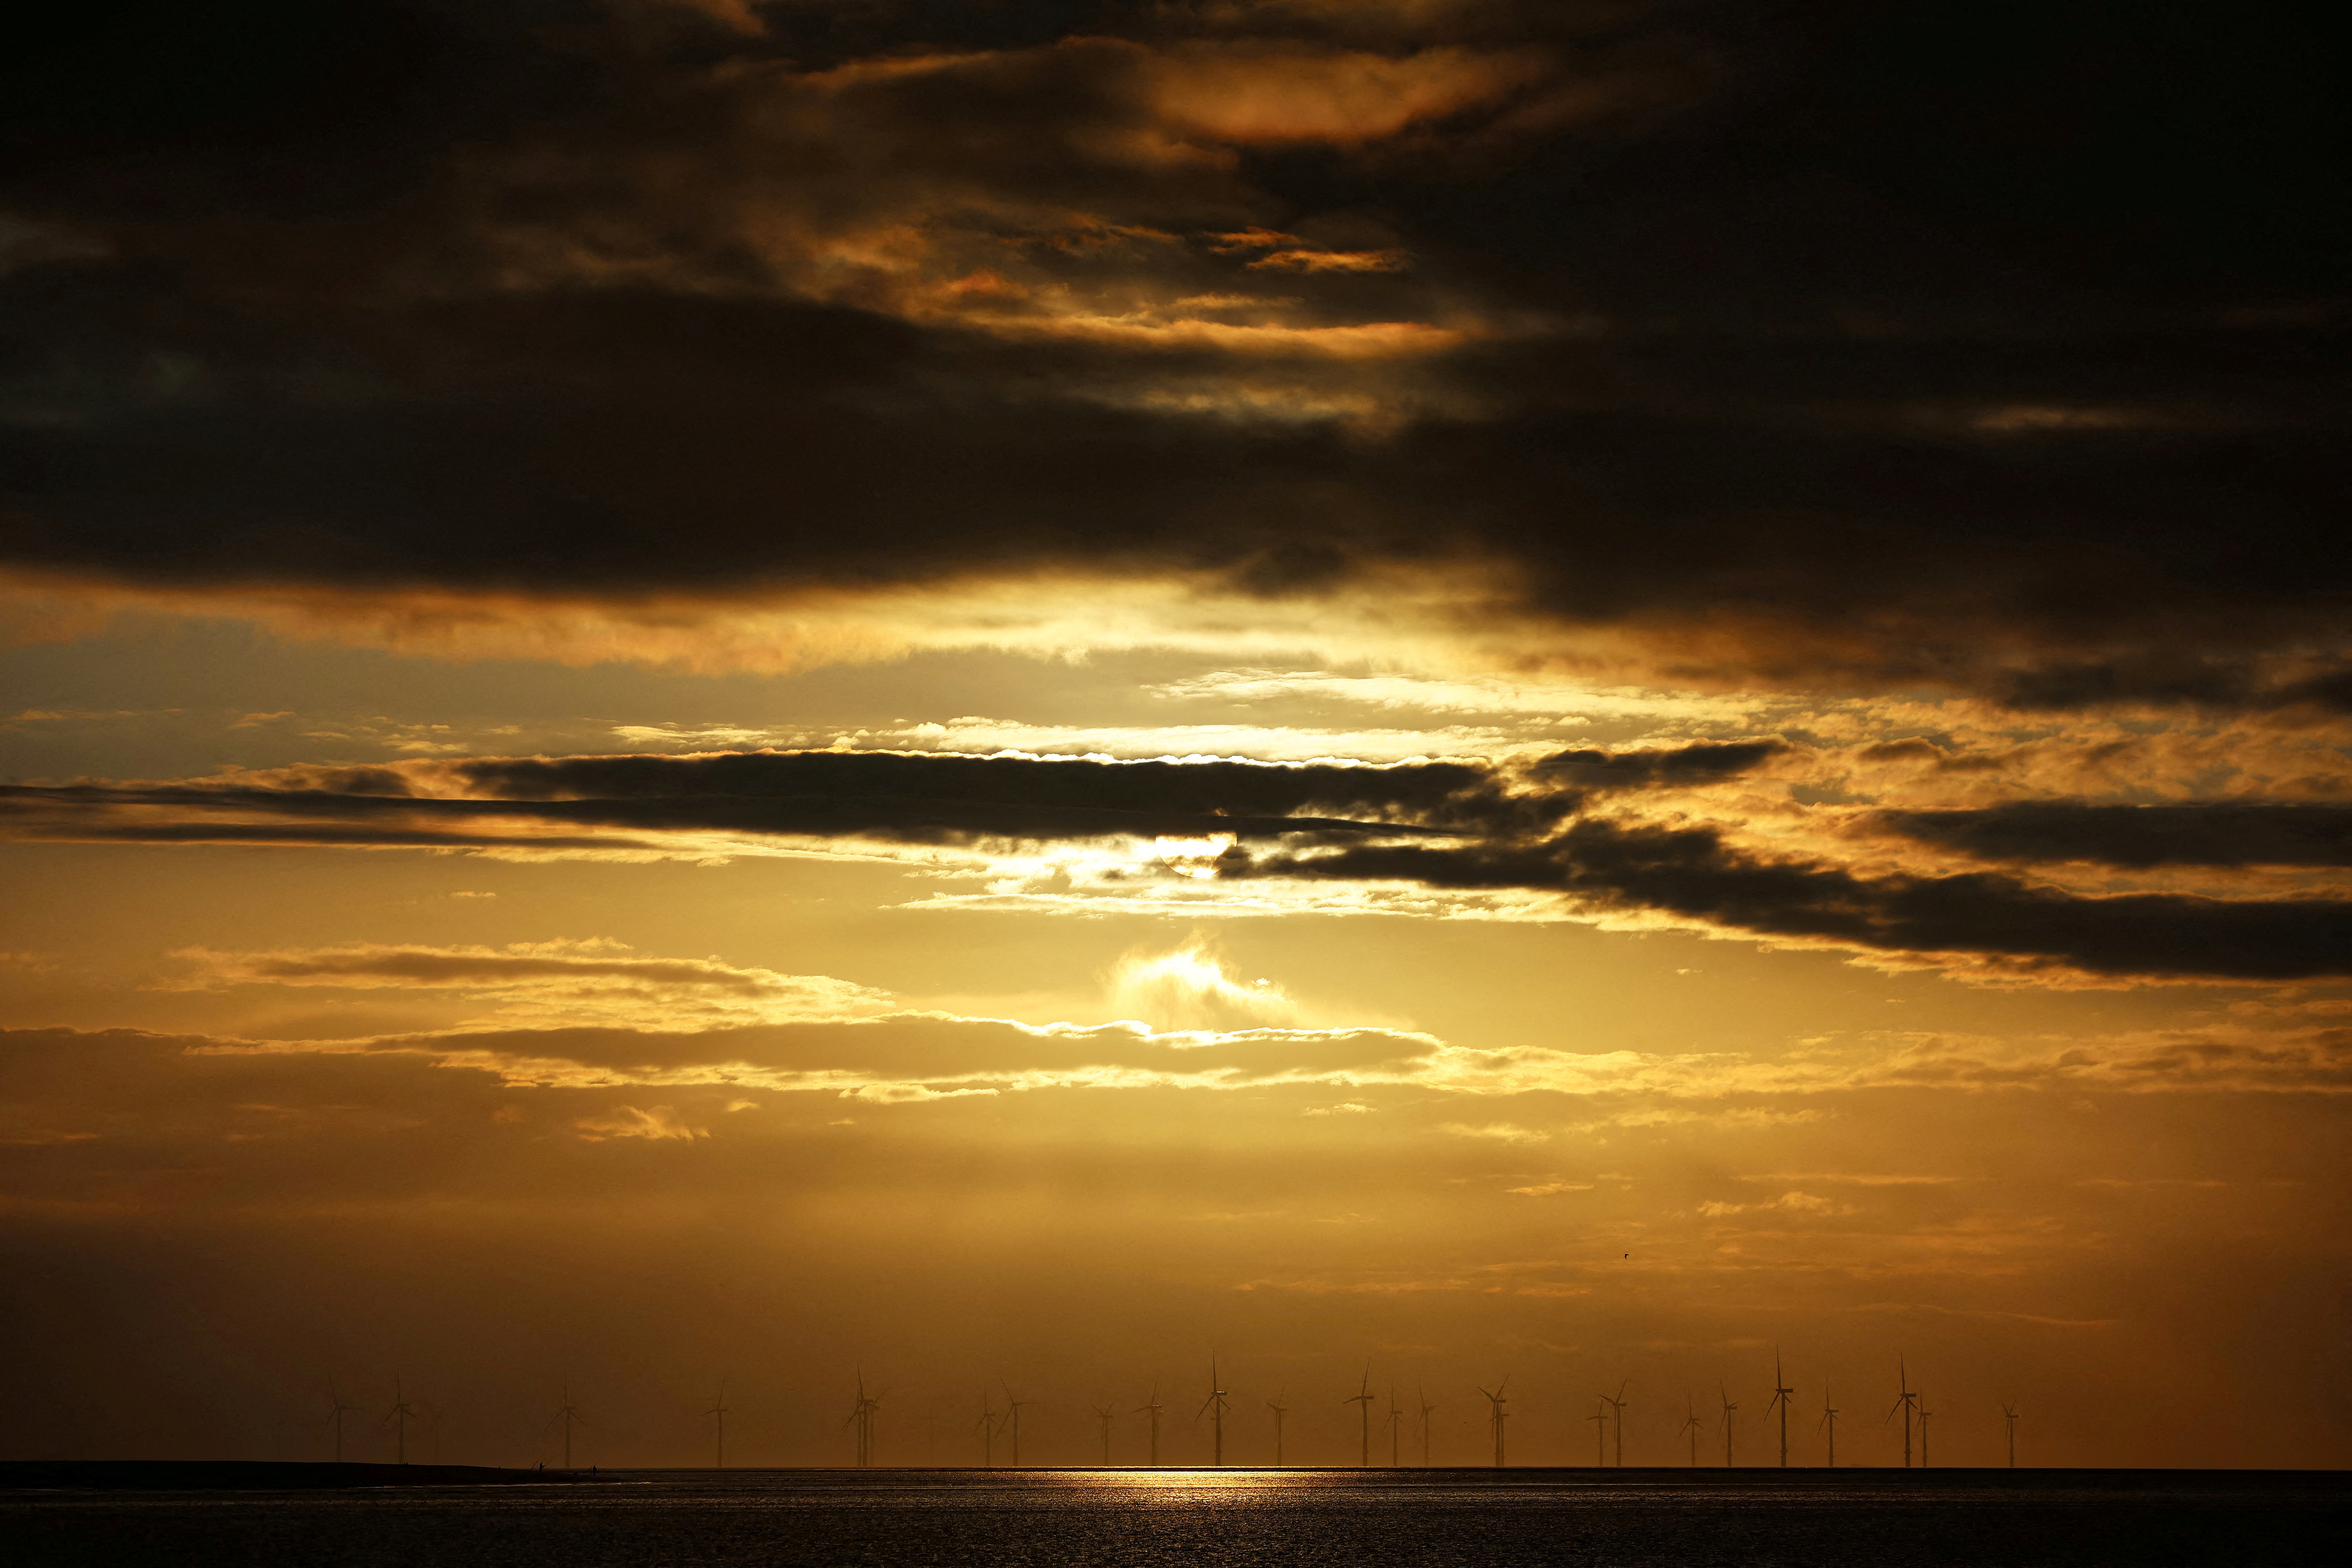 The sun sets behind wind turbines on the Burbo Bank wind farm in the Mersey Estuary in Liverpool